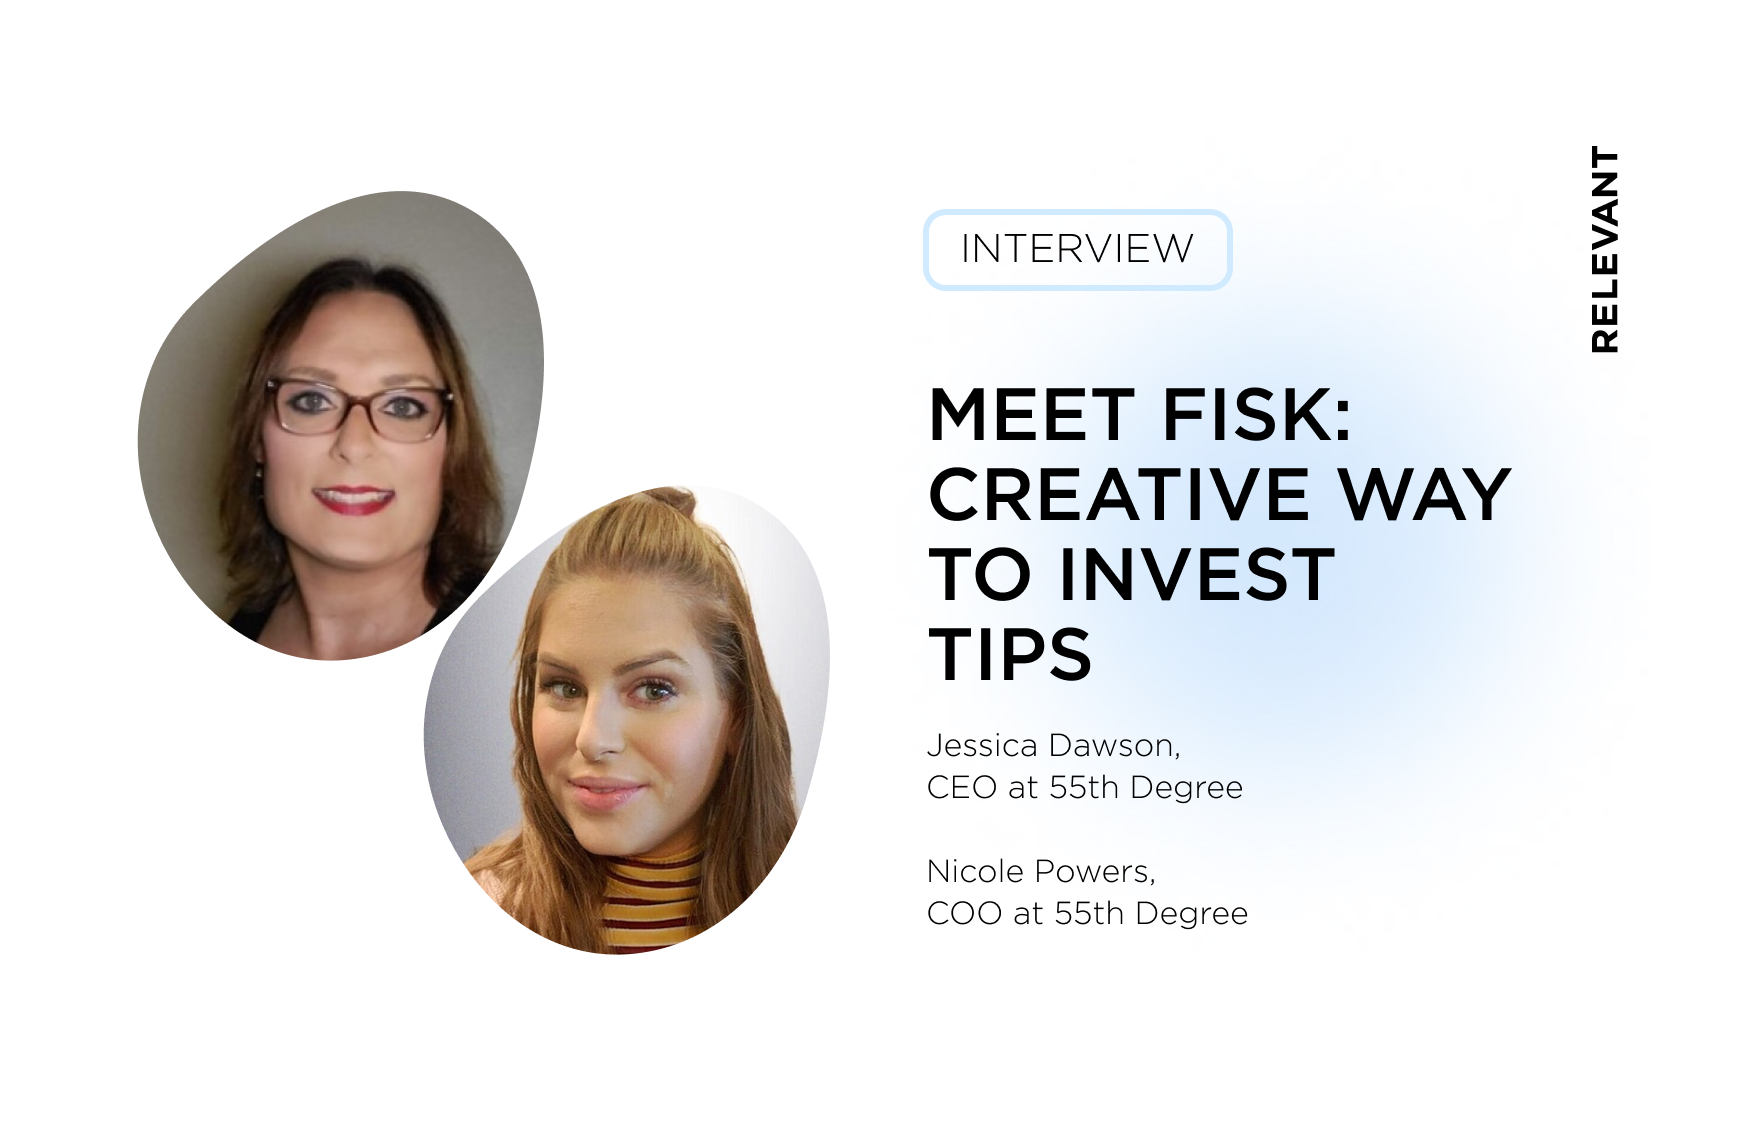 Meet FISK: Creative Way to Invest Tips